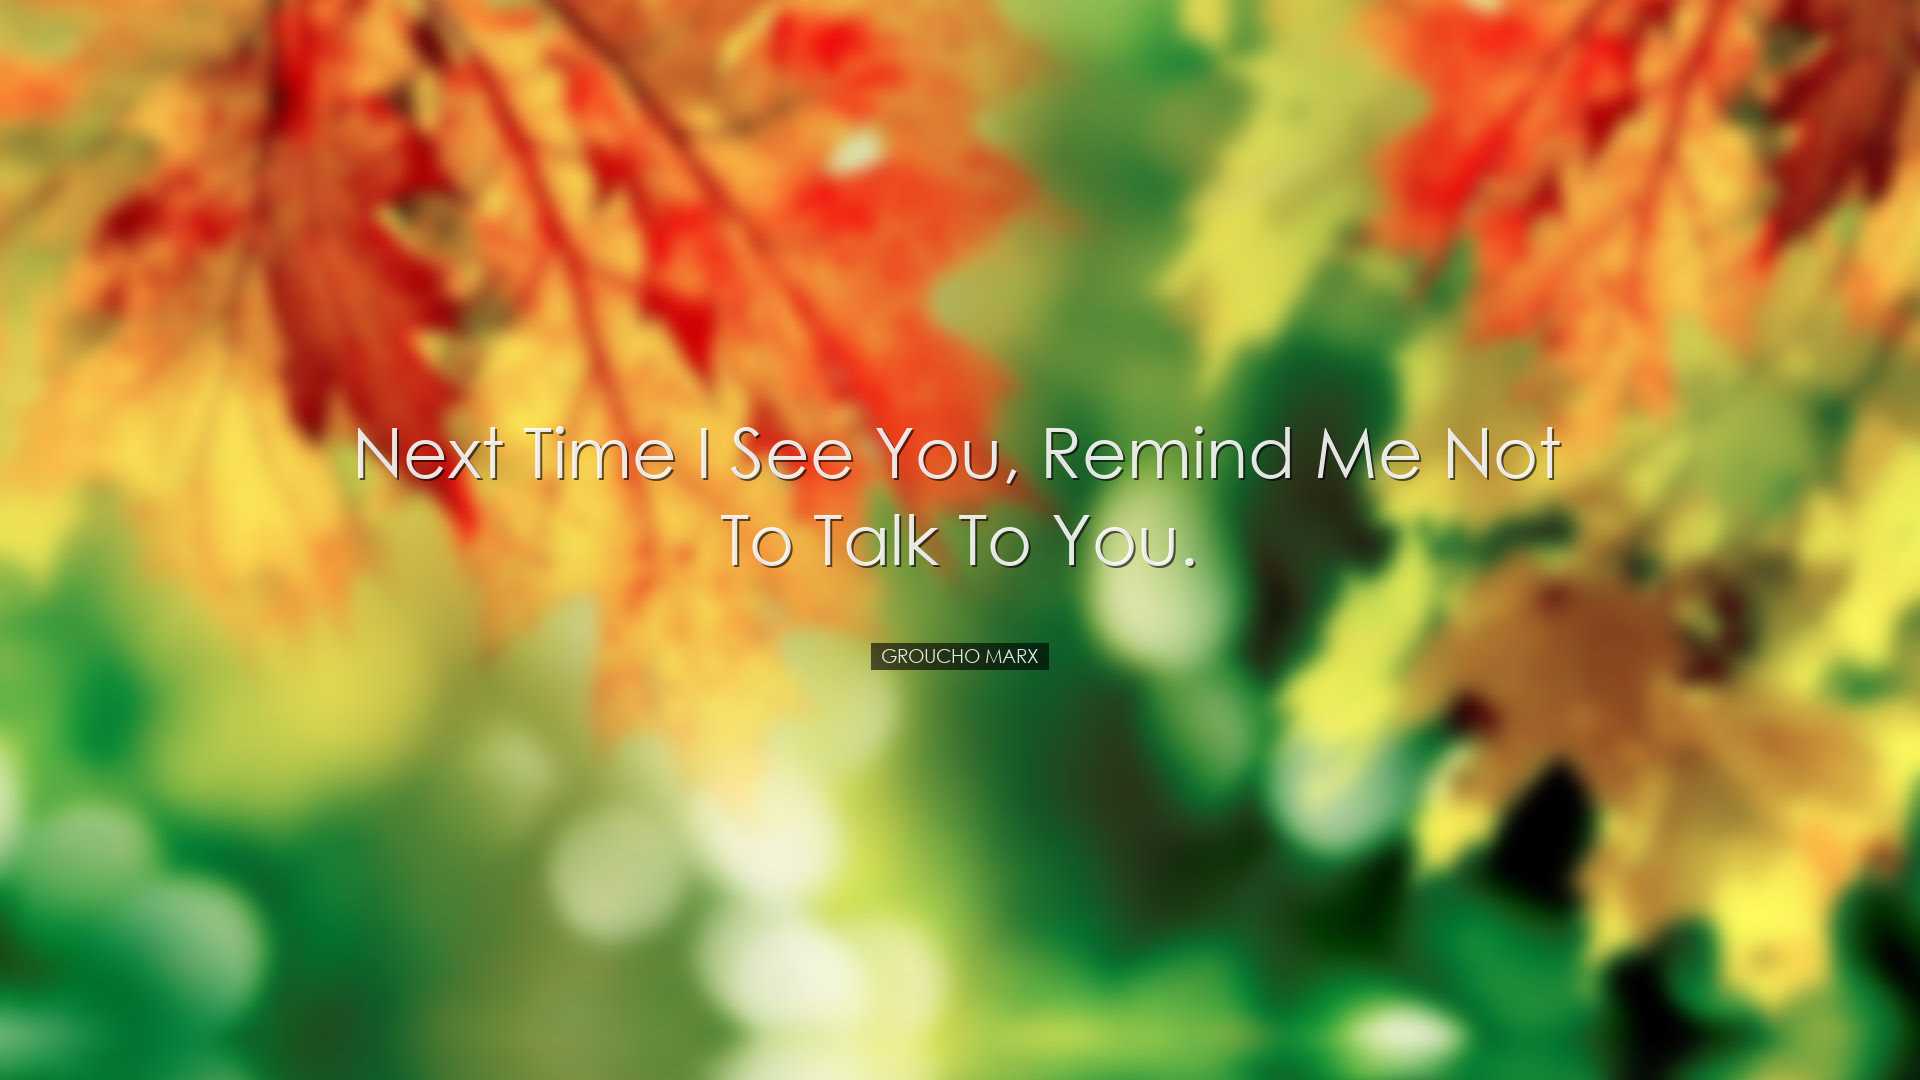 Next time I see you, remind me not to talk to you. - Groucho Marx